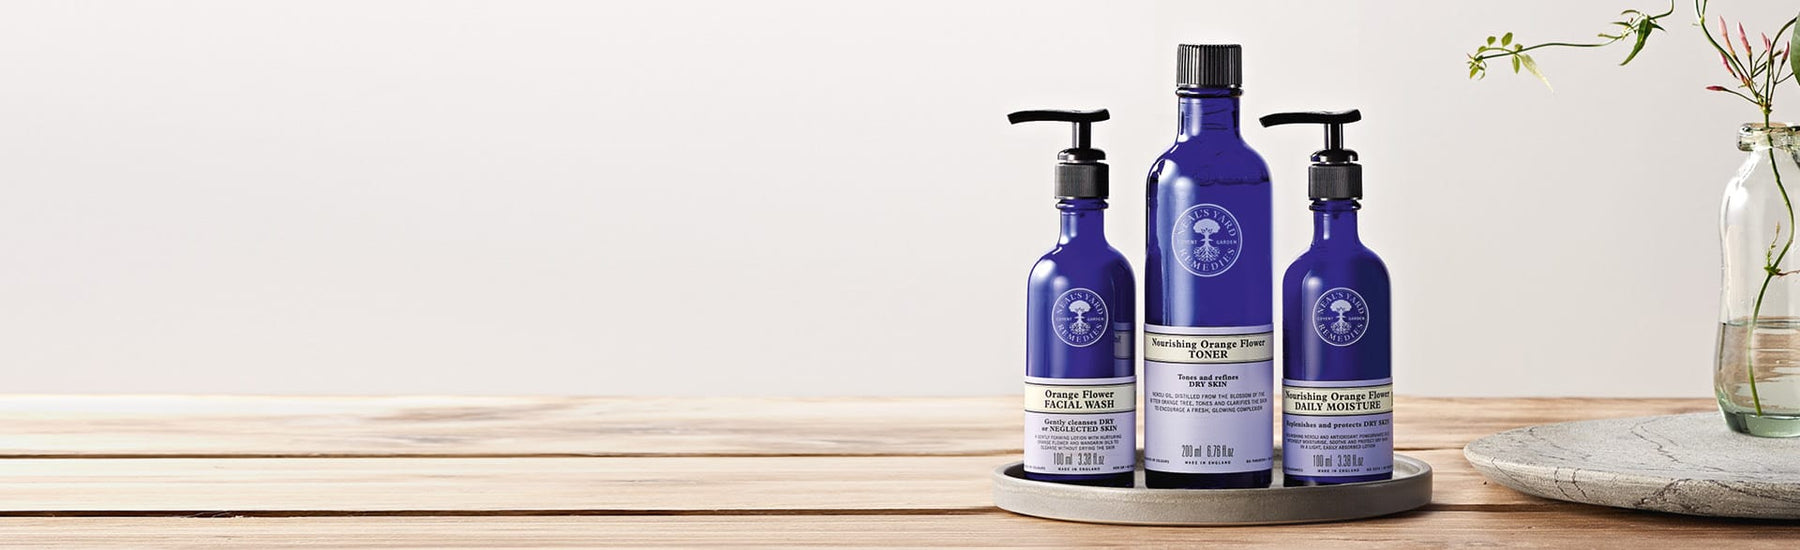 Picture of the Nourishing Orange Flower Skincare range by Neal's Yard Remedies